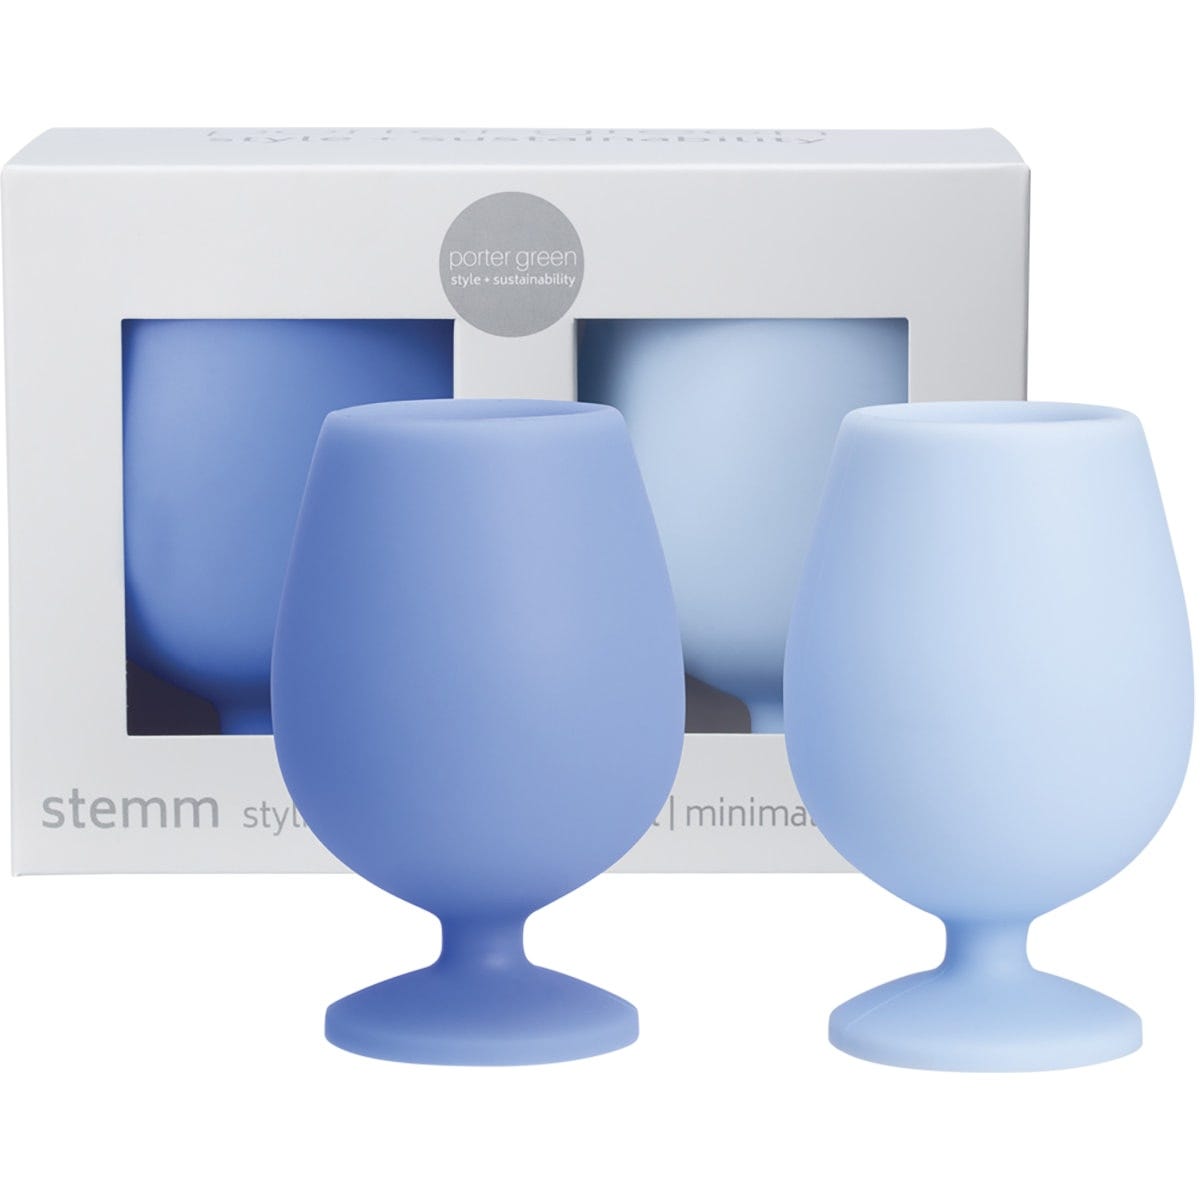 Porter Green Stemm Silicone Wine Glass Set Londrina 2x250ml - Dr Earth - Cups & Tumblers